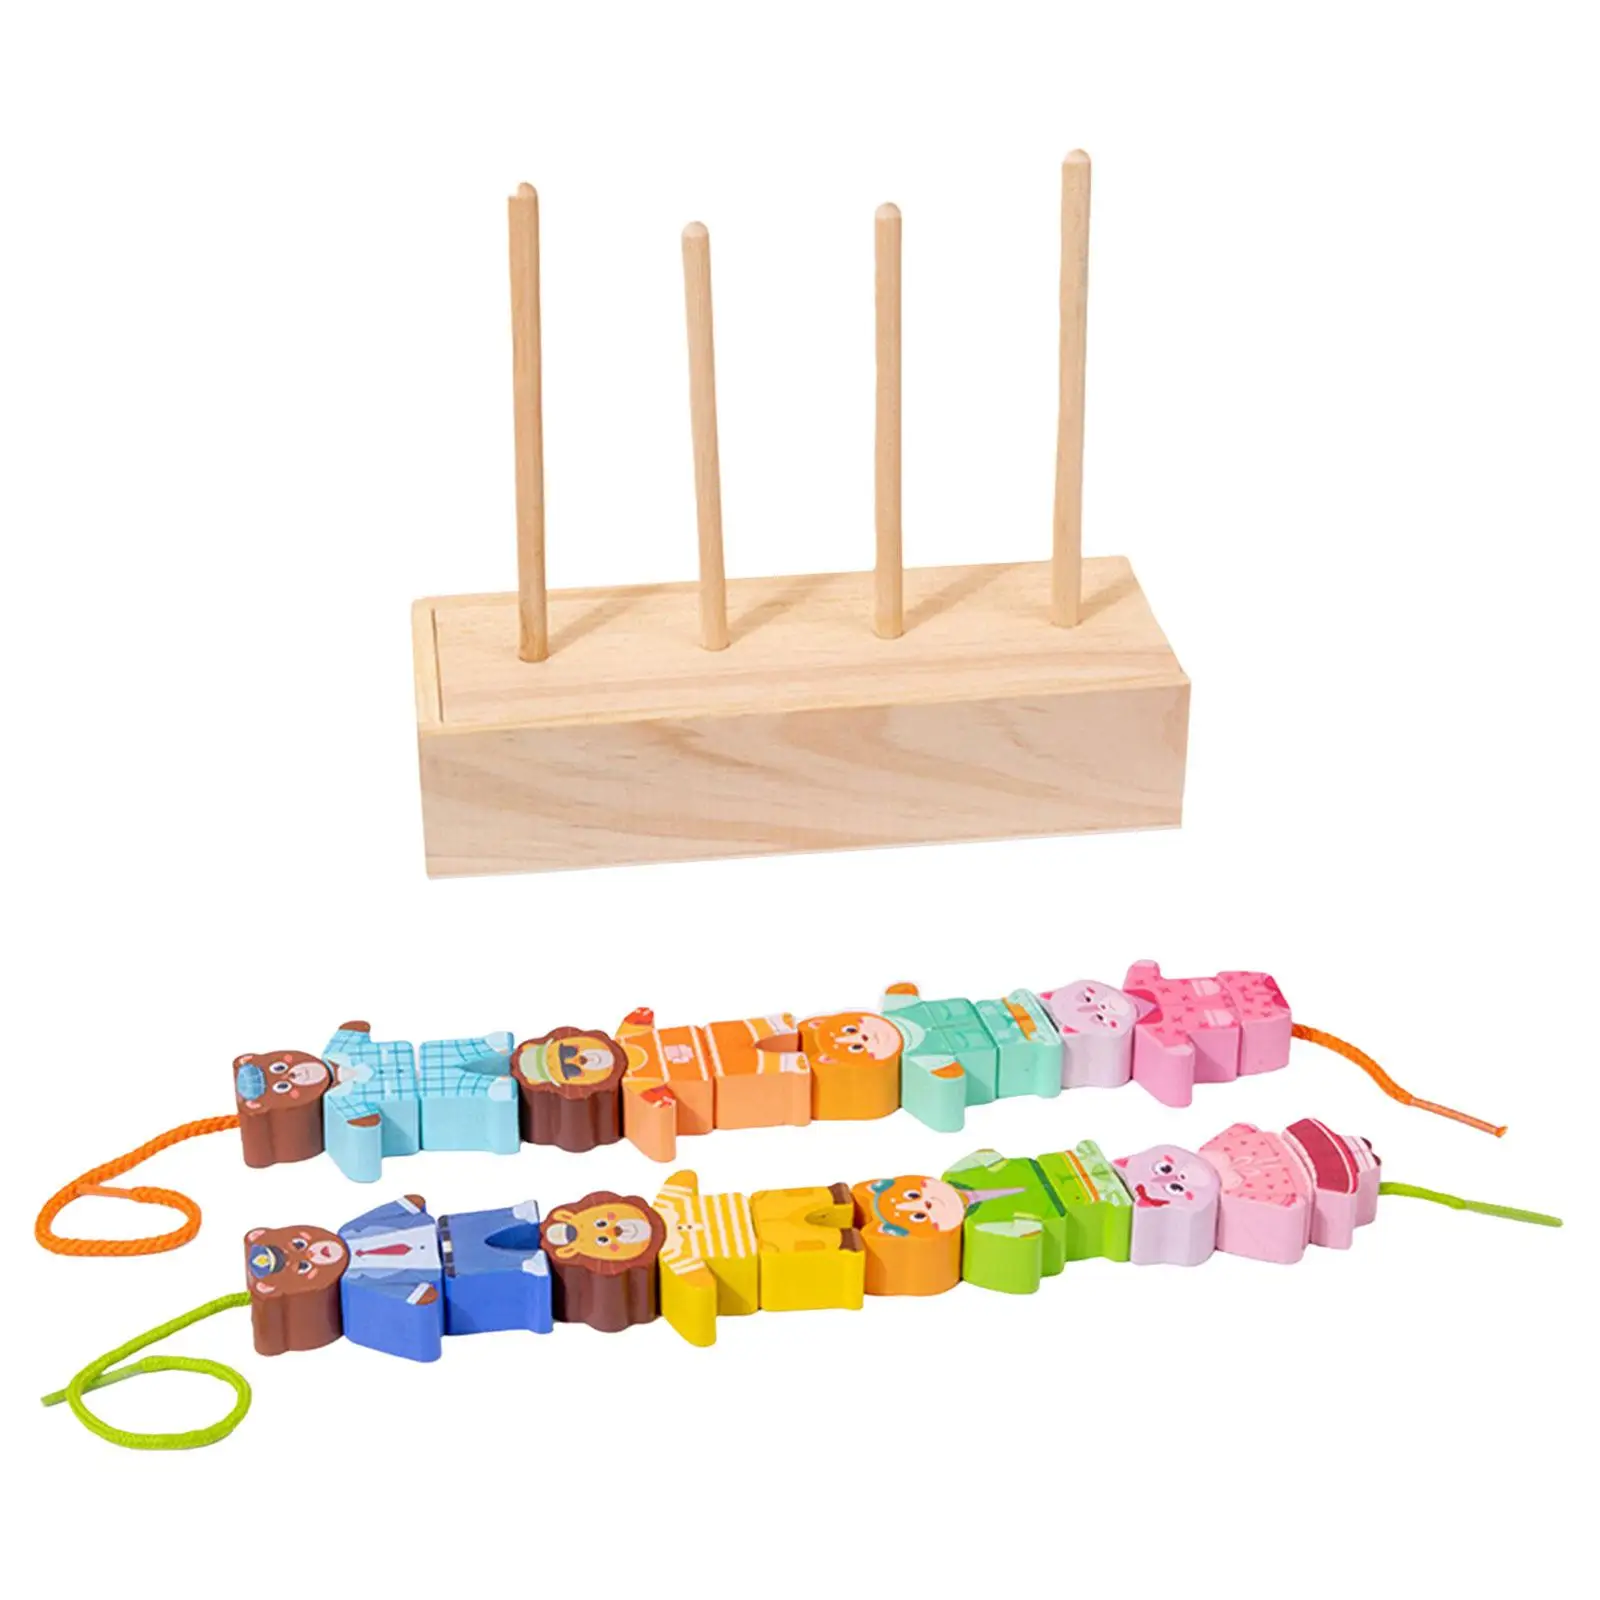 Wooden Lacing Beads Animals Stringing Blocks Cute Educational Toy for 1 2 3 4 Years Old Boys Children Girls Hoilday Gifts